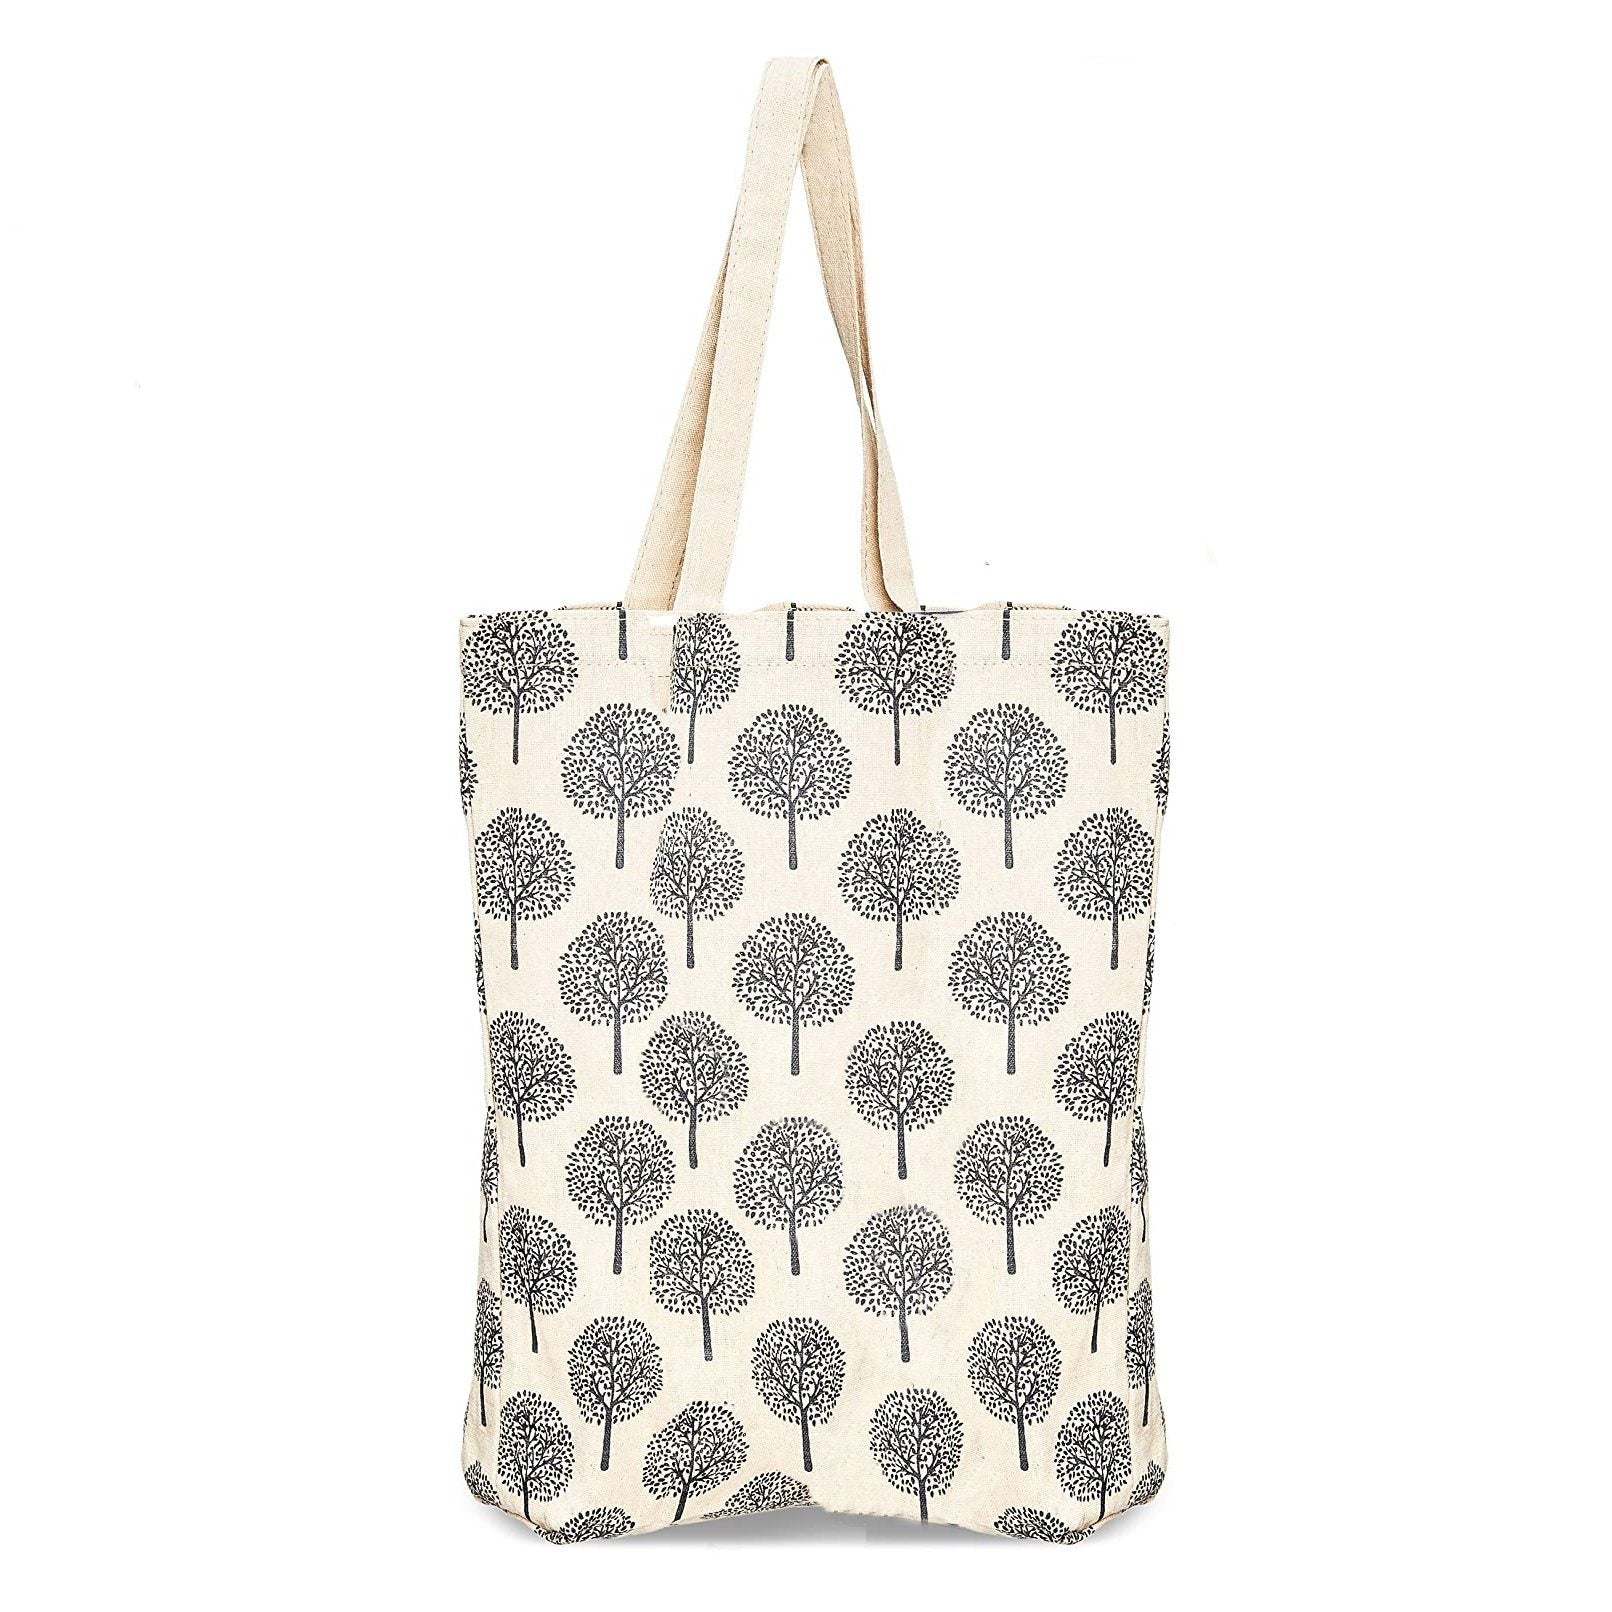 Reusable Cotton Grocery Shopping Tote Bag / Tree Print